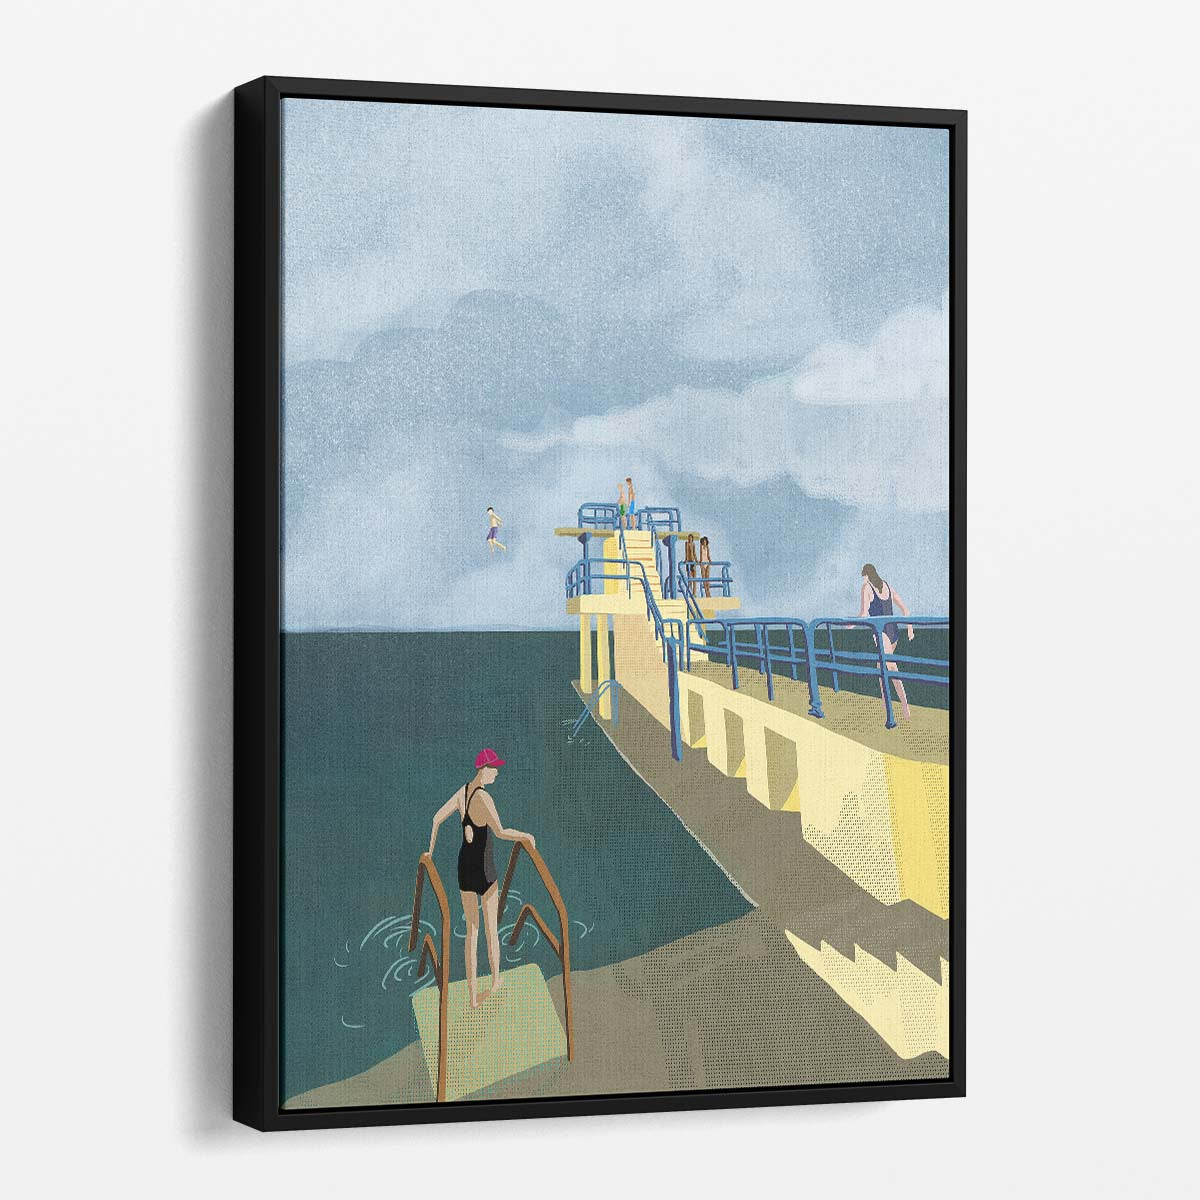 Irish Landscape Illustration Blackrock Diving Tower in Salthill, Galway by Luxuriance Designs, made in USA